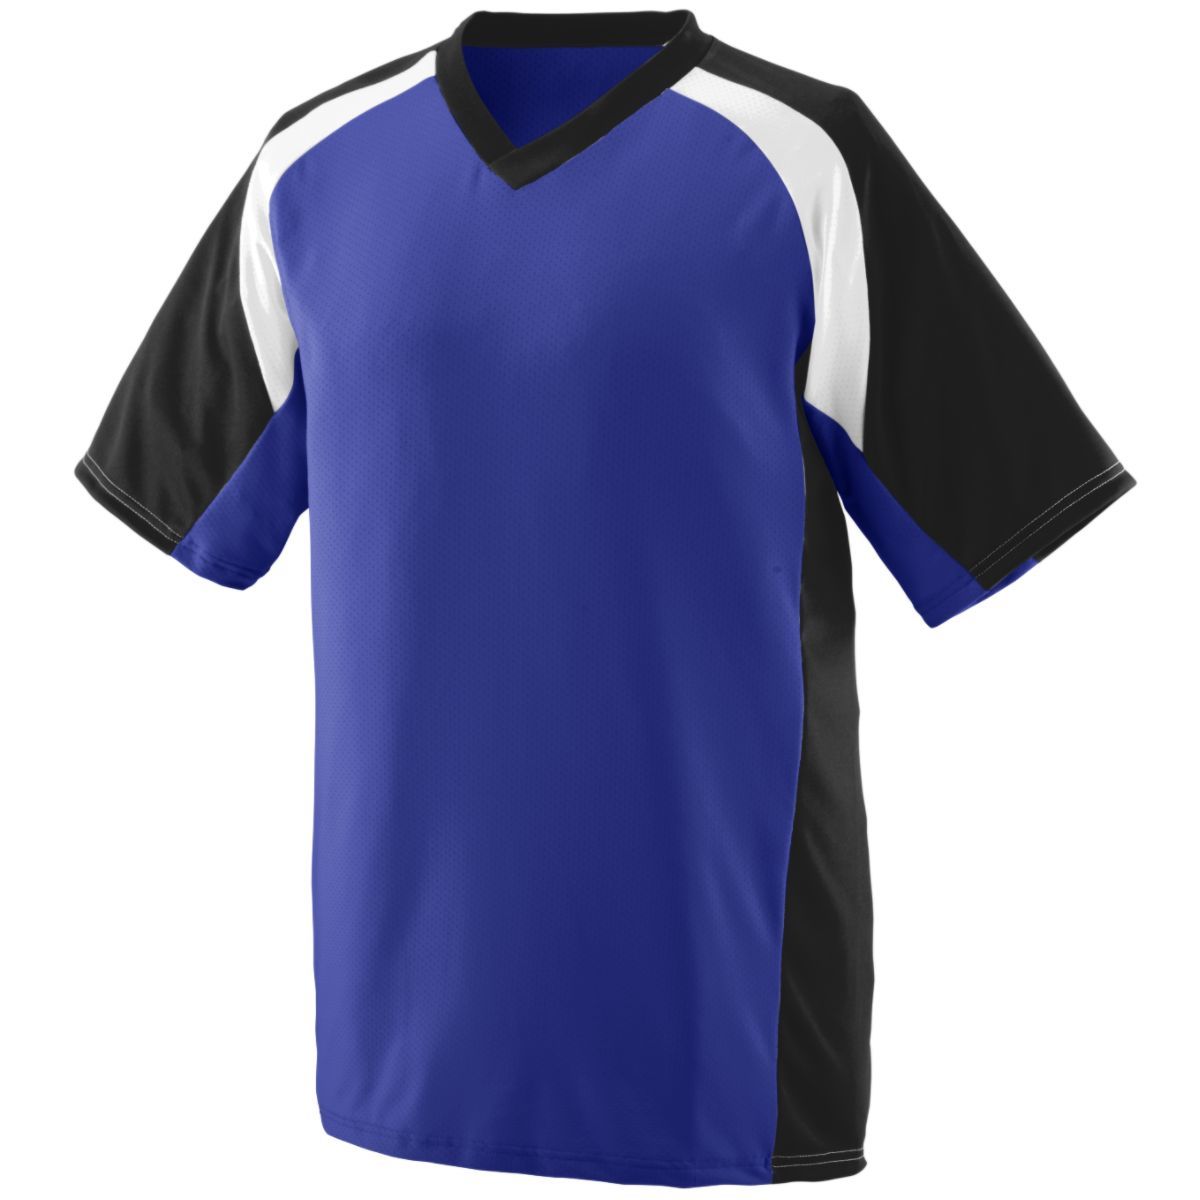 Augusta Sportswear Youth Nitro Jersey in Purple/Black/White  -Part of the Youth, Youth-Jersey, Augusta-Products, Football, Shirts, All-Sports, All-Sports-1 product lines at KanaleyCreations.com